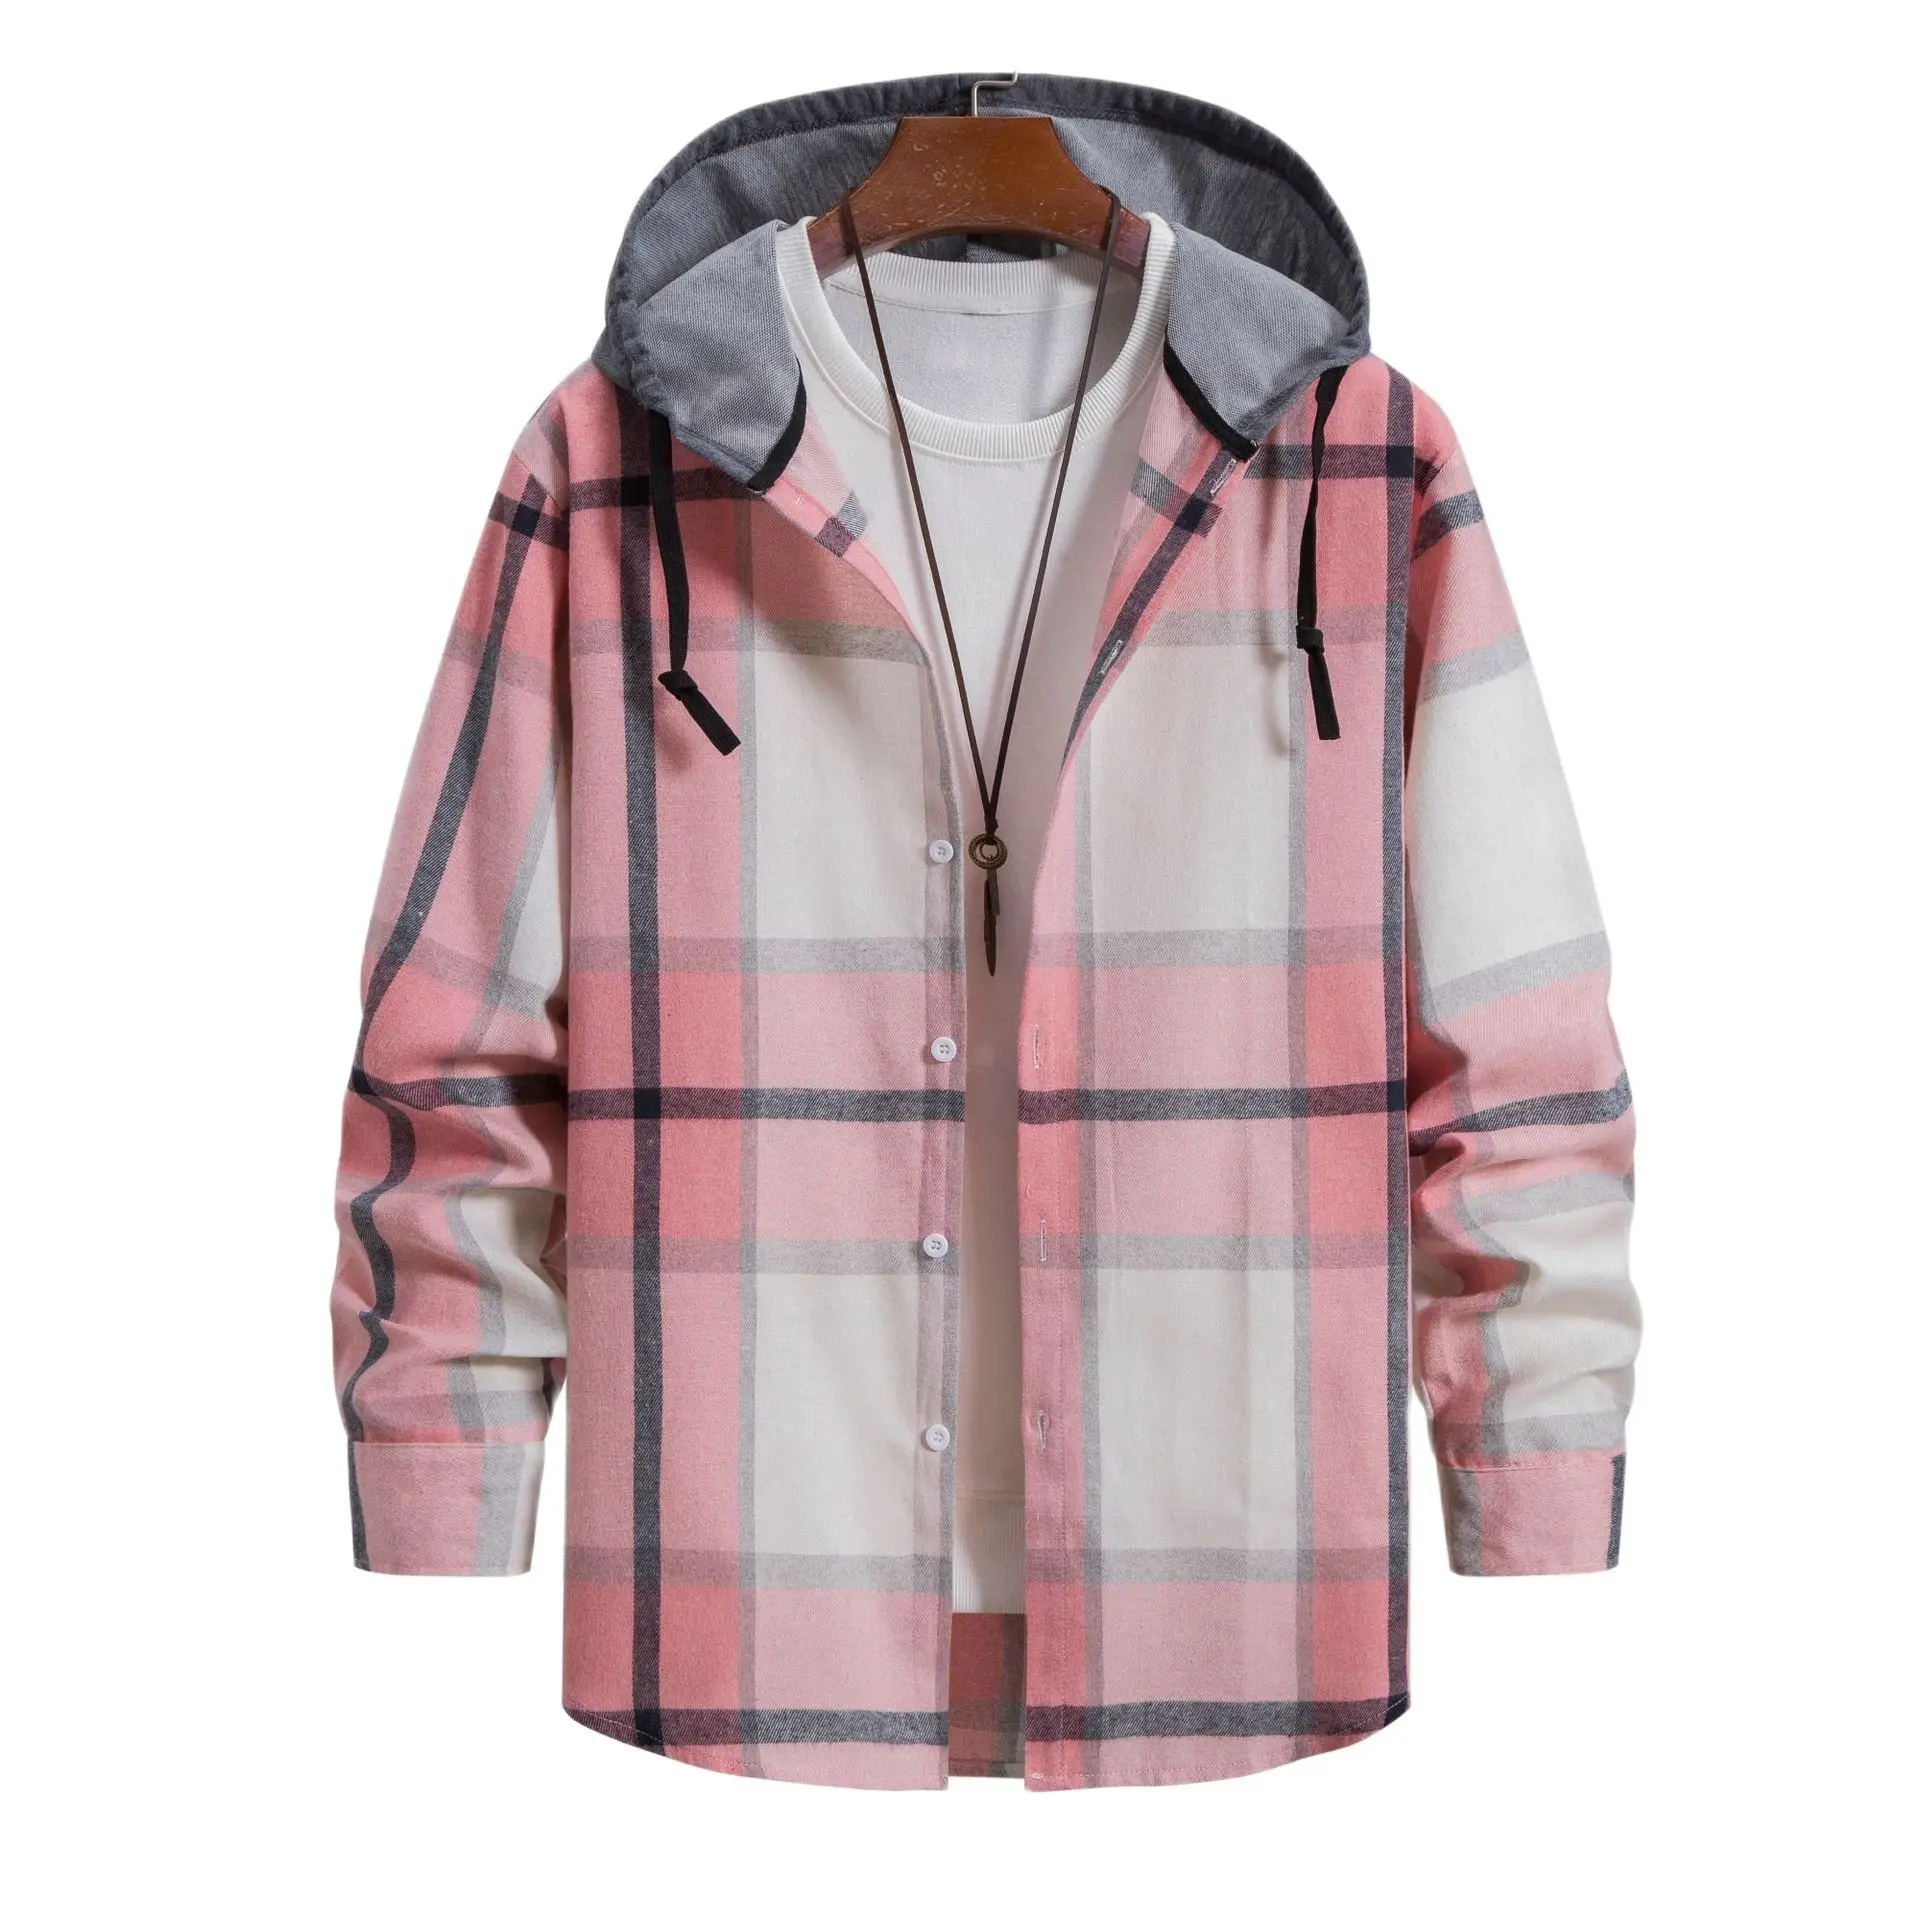 

Unisex Pink Plaid Hooded Shirt Fashion Casual Long Sleeve Checkered Blouse Tops 2023 New Hipster Streetwear Shirts with Hoodies